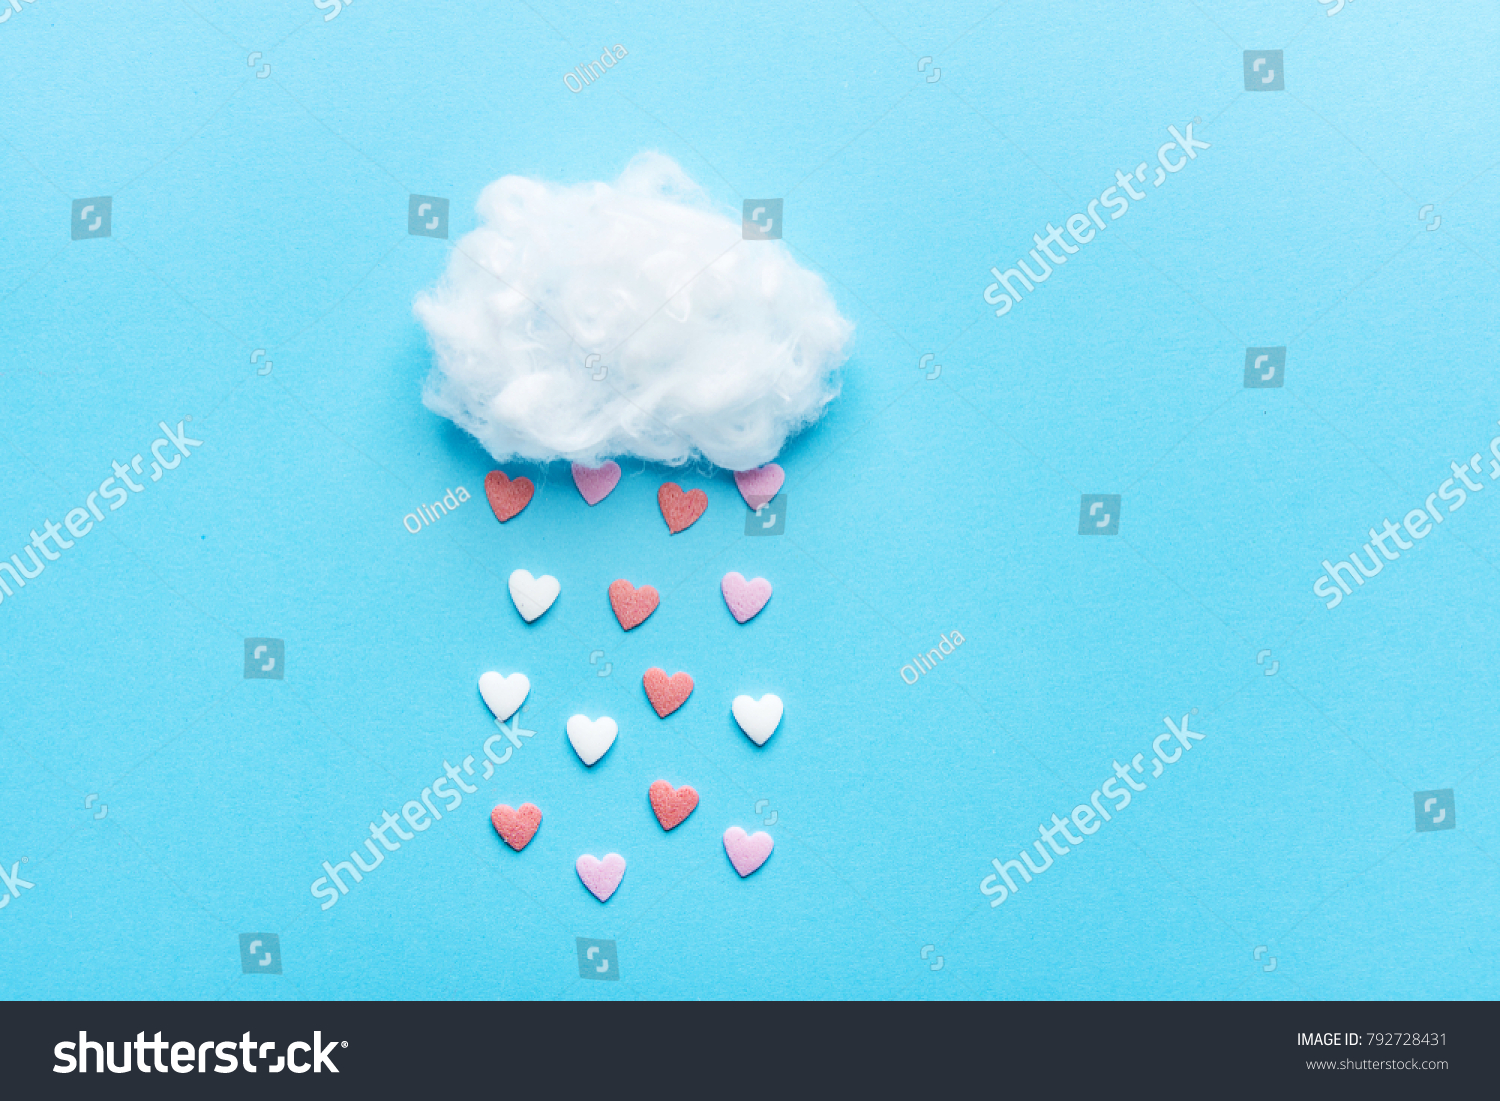 Cotton Ball Cloud Rain Sugar Candy Sprinkle Hearts Red Pink White on Blue Sky Background. Applique Art Composition Kids Style. Valentines Love Charity Concept. Greeting Card Poster Copy Space #792728431